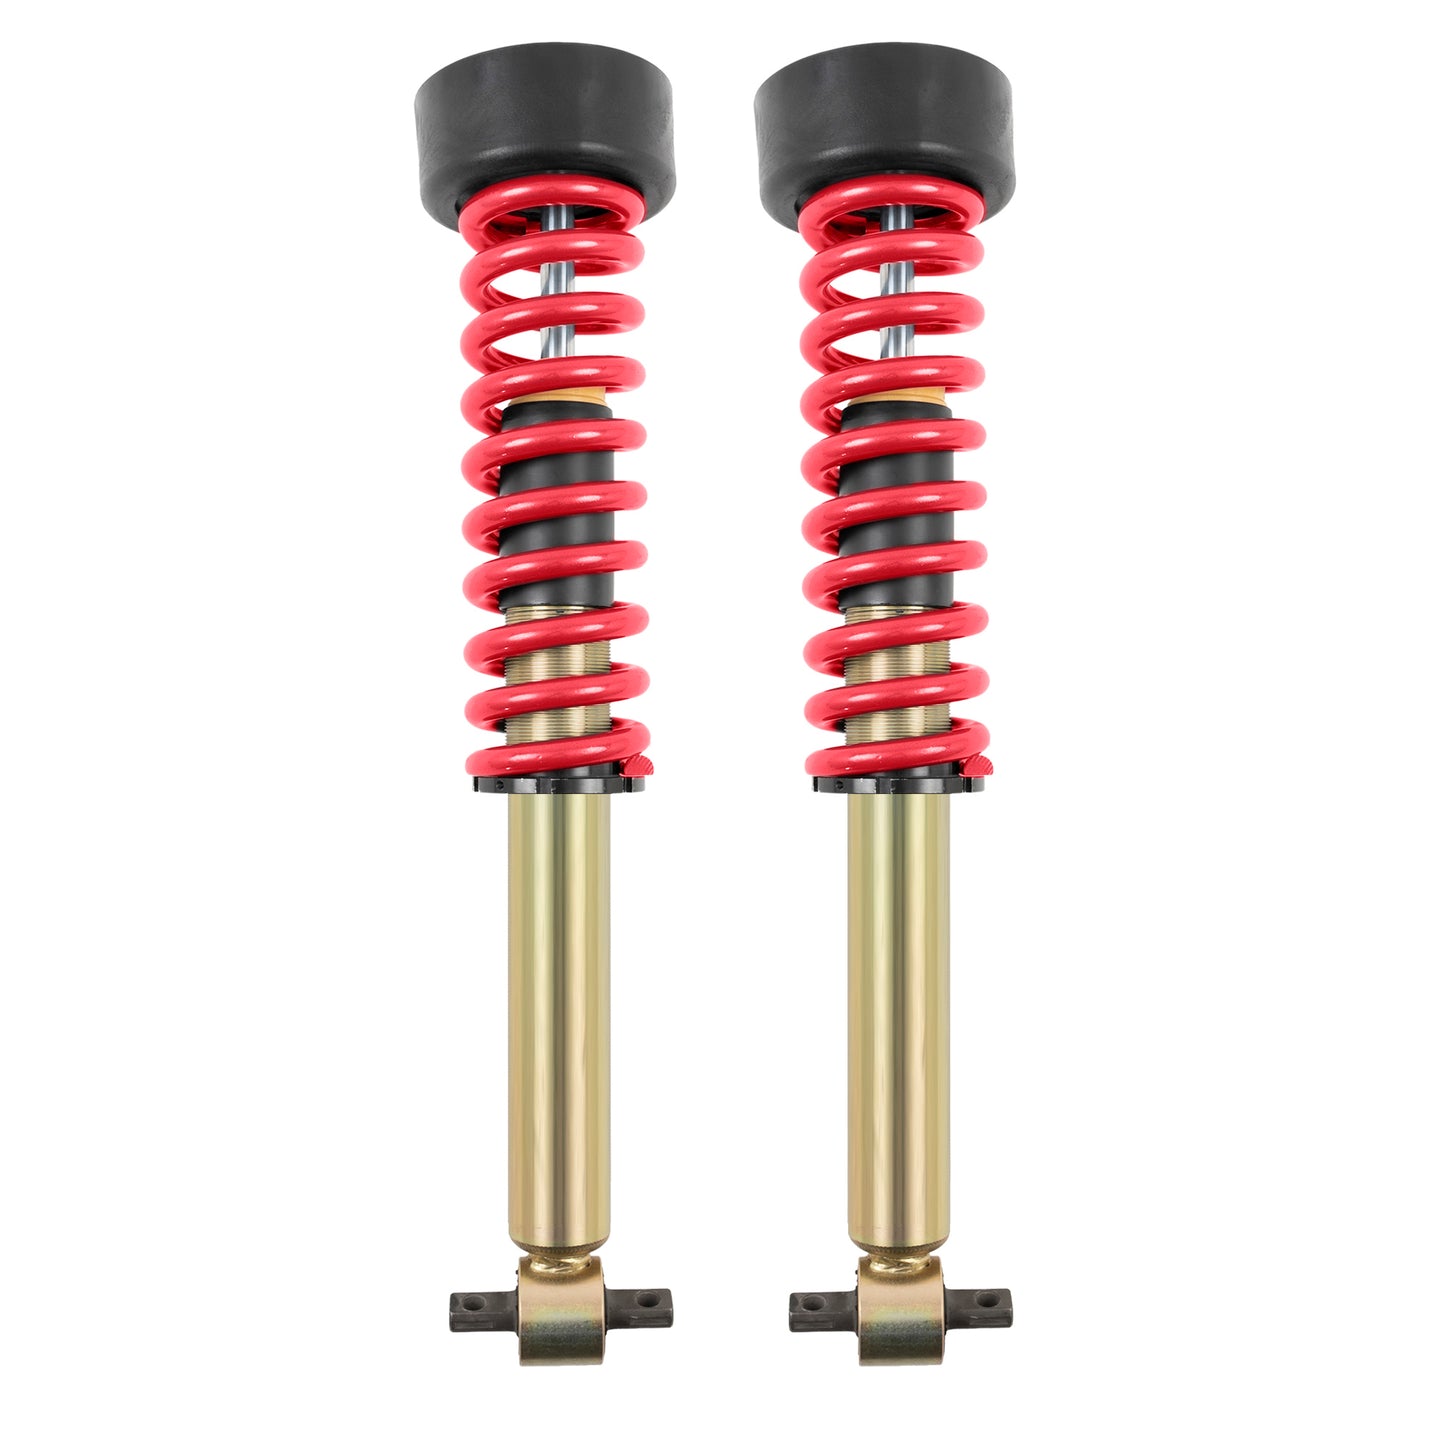 BELLTECH 15303 COILOVER KIT Factory Preset Fixed Damping 6-8in. Height Adjustable Lift 2019-2021 Silverado/Sierra 1500 4wd 6 - 8in. Lift (fixed dampening)